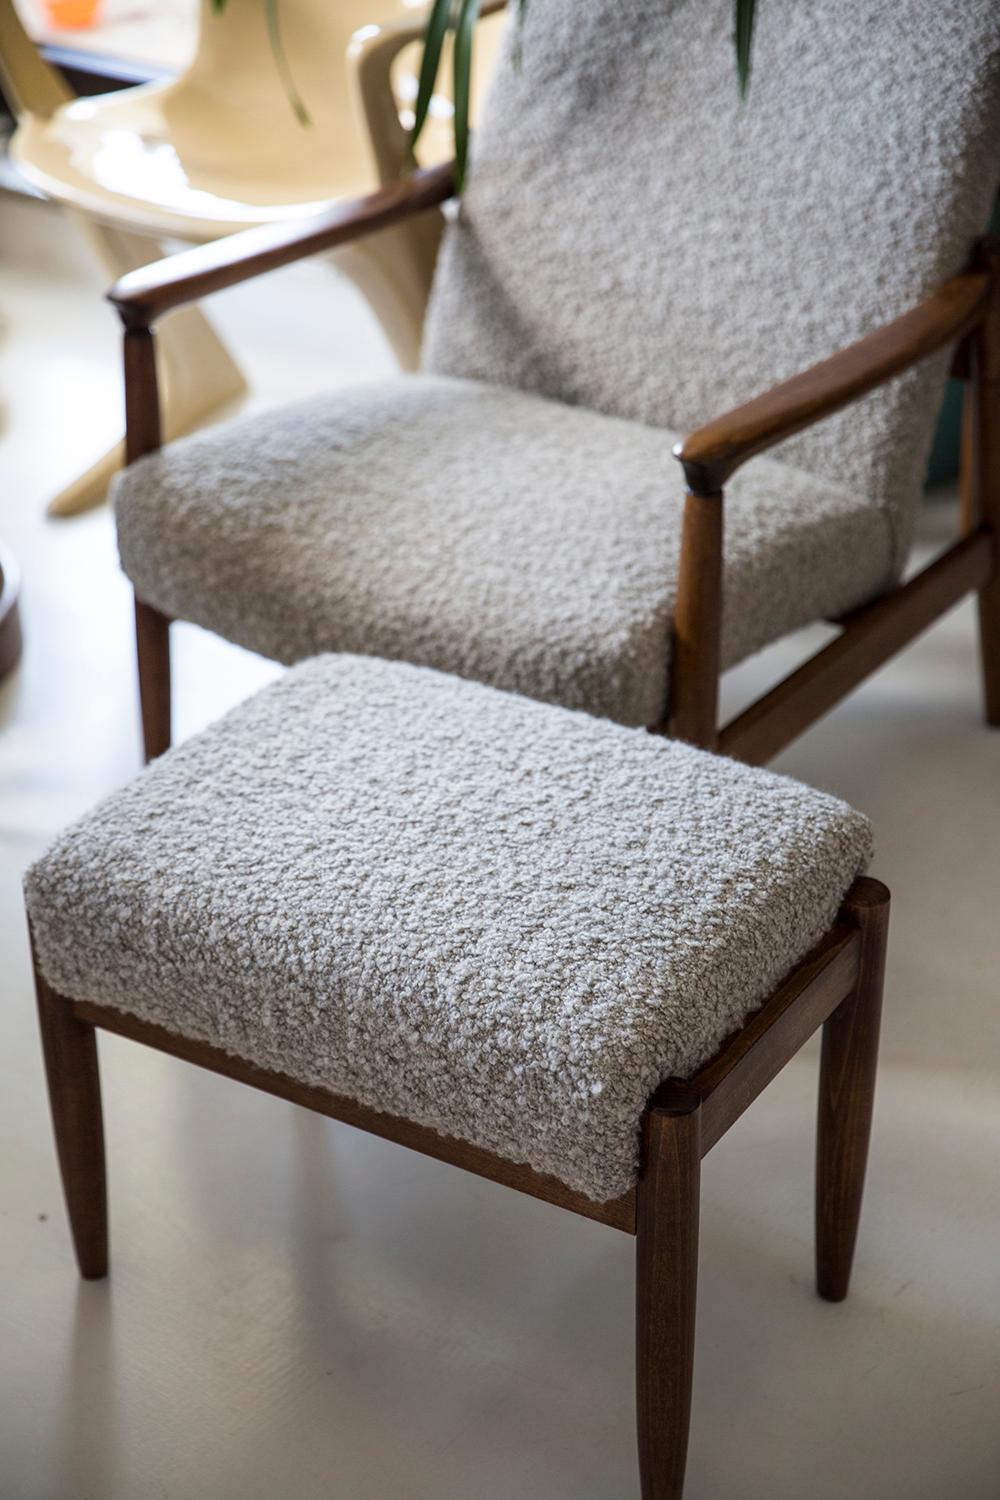 Midcentury Gray Alpaca Wool Armchairs and Stools, Edmund Homa, Poland, 1960s For Sale 2